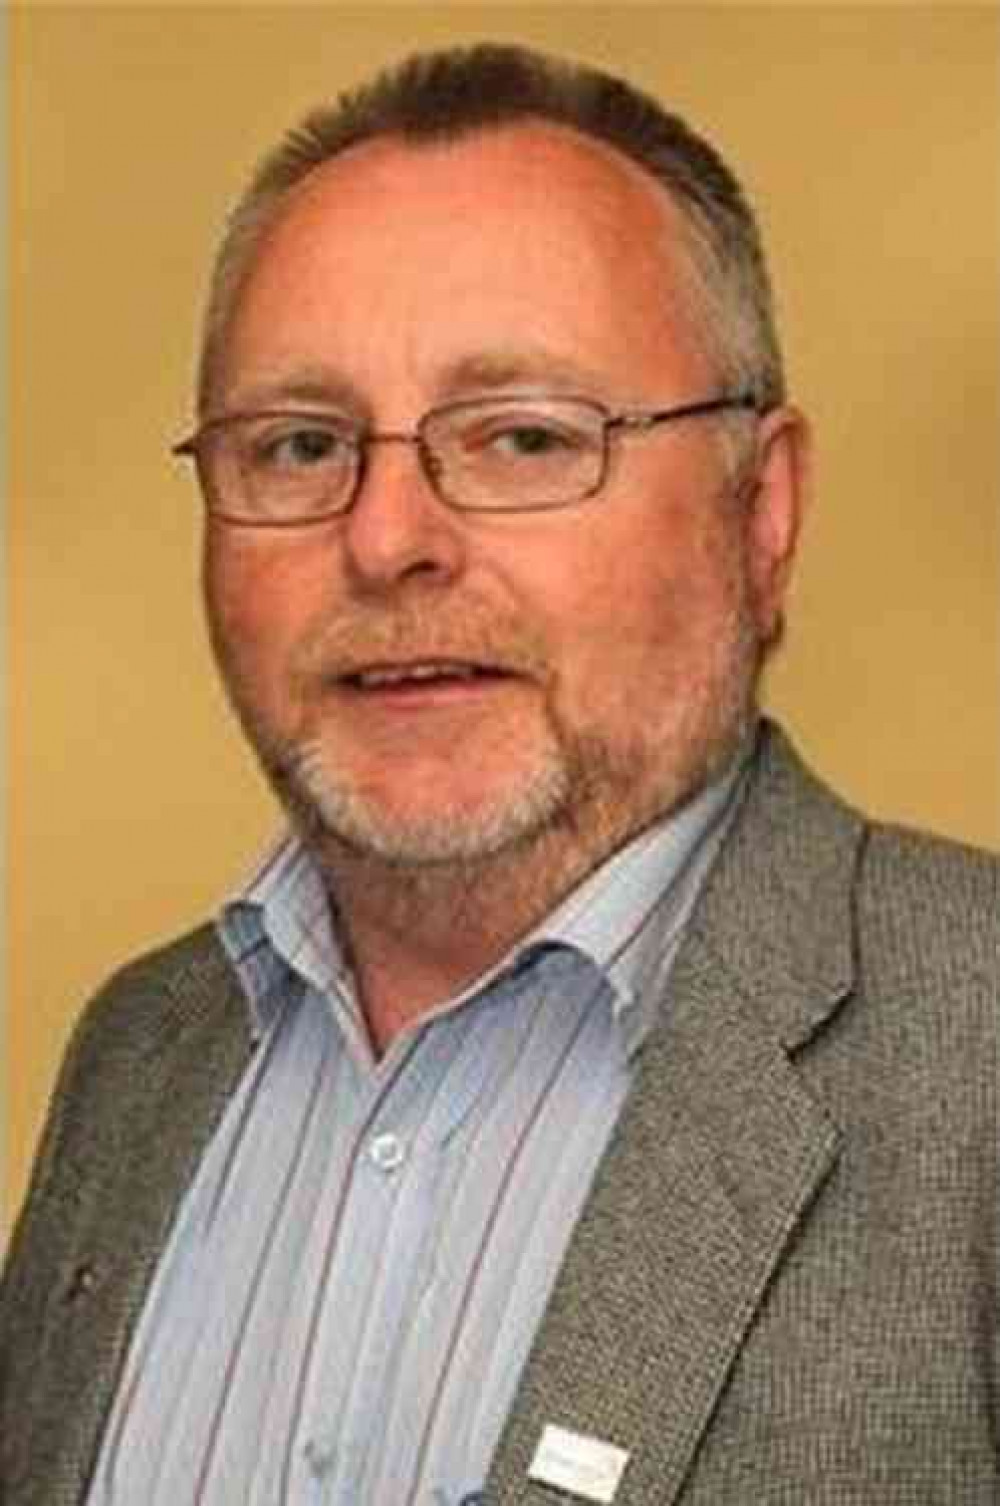 Former councillor, Bill Livesley (Image: Cheshire East Council)